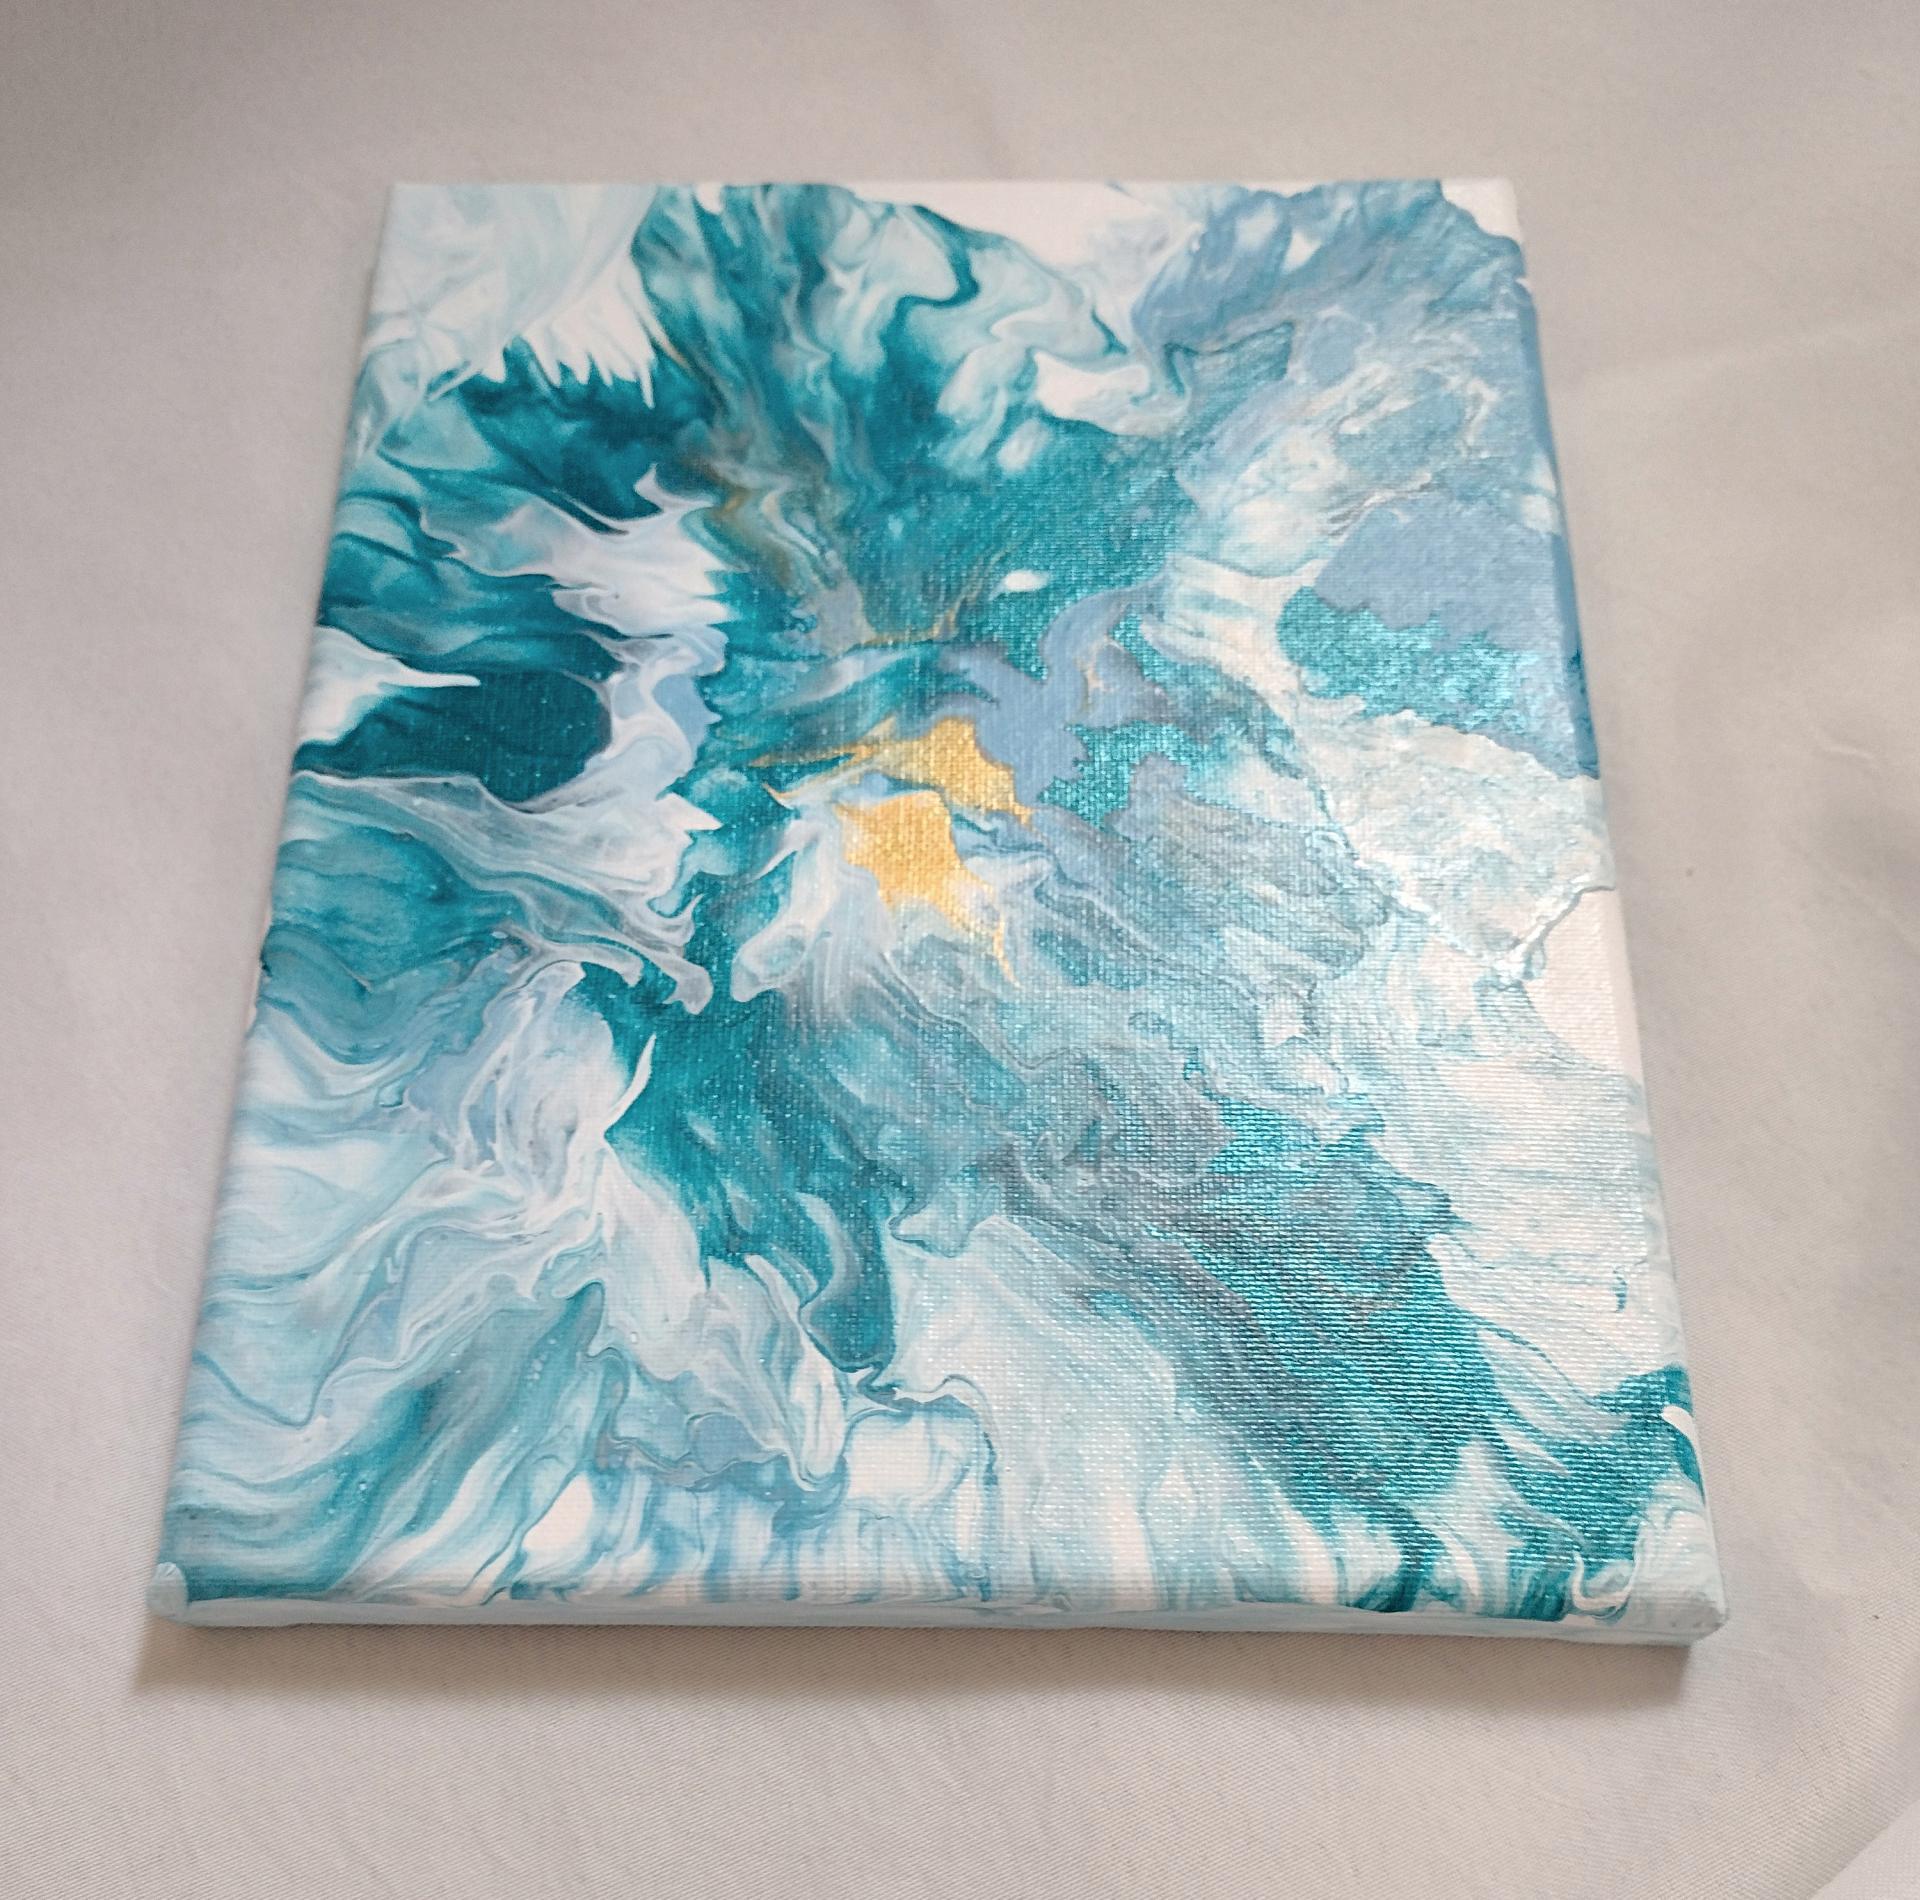 Blue and Gold Original Acrylic Abstract Painting, 8" x 10" on Canvas